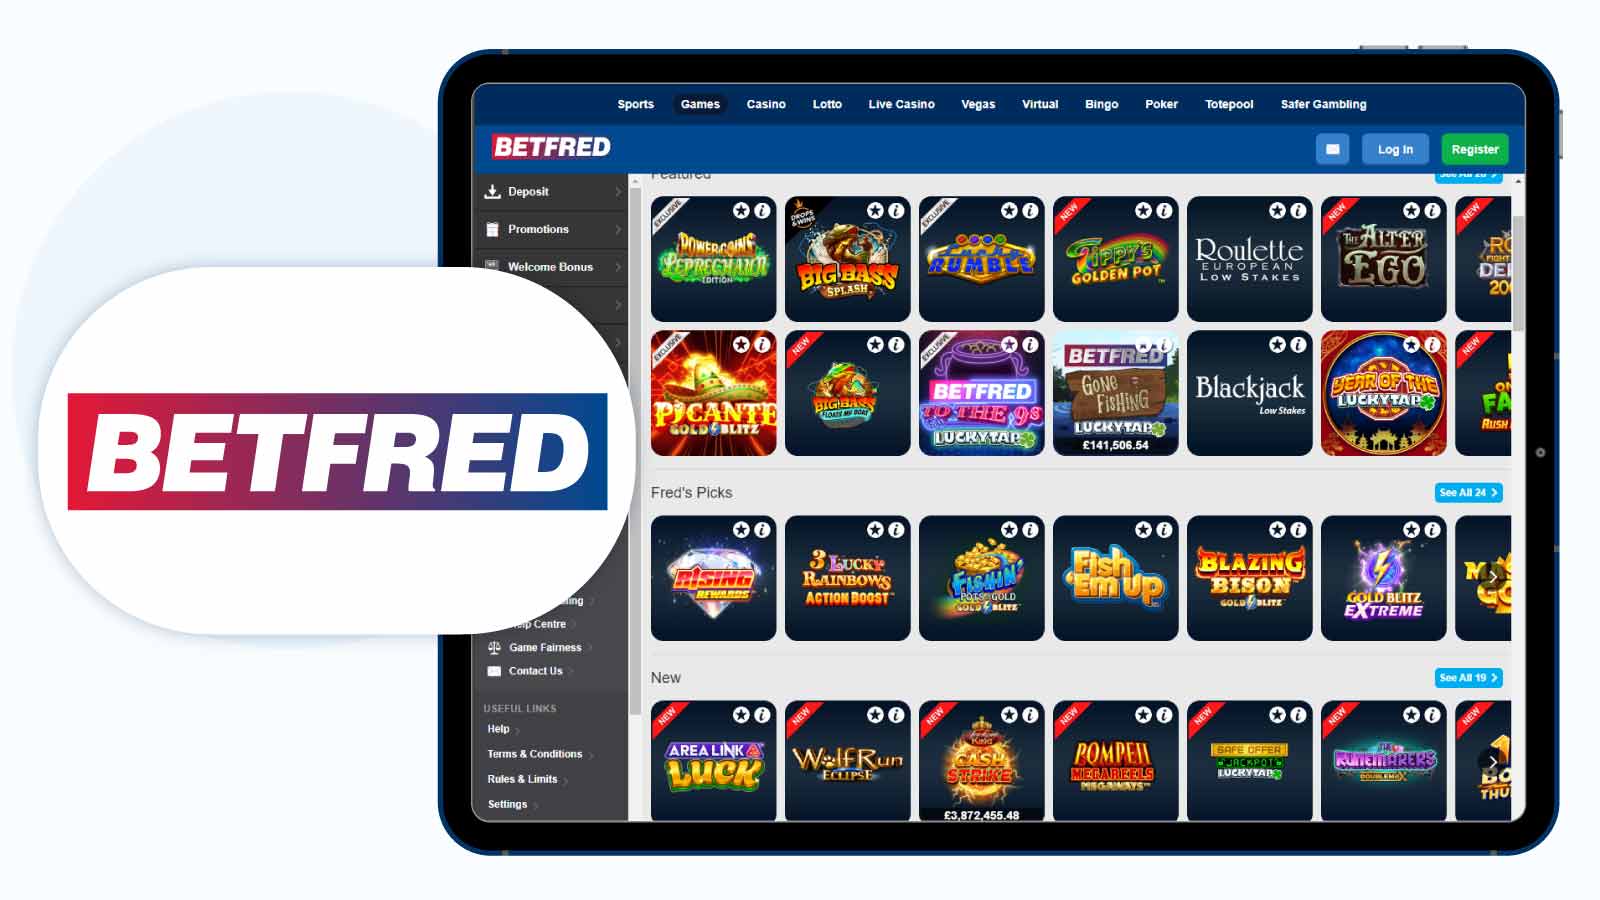 Stake £20 Get 5 Golden Chips at Betfred Casino